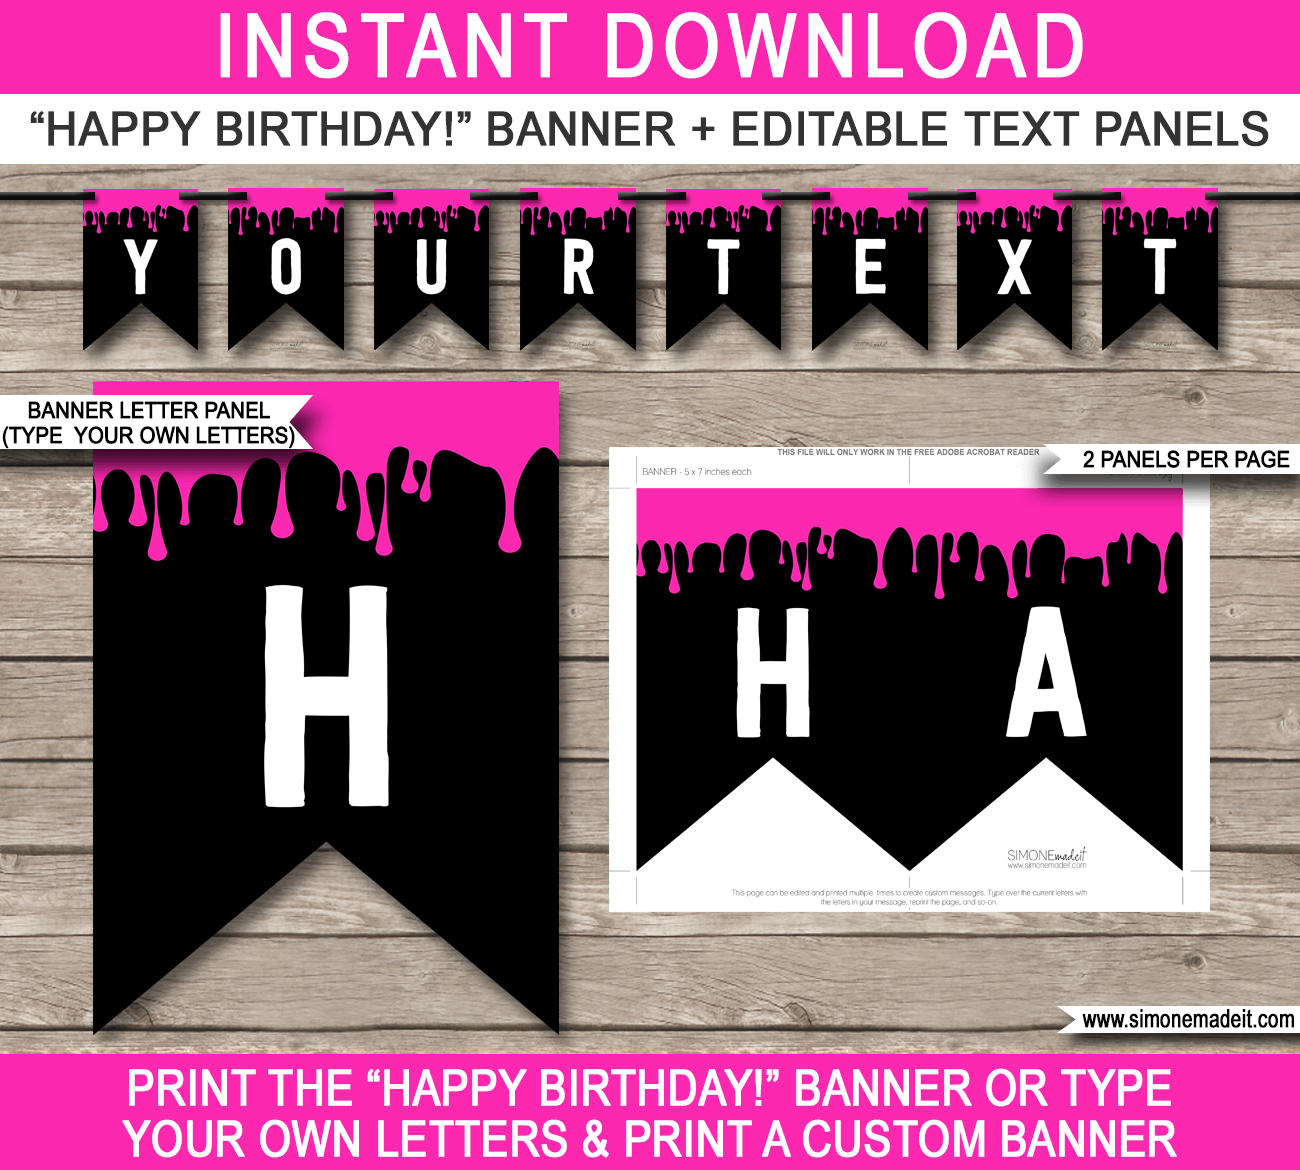 Slime Birthday Party Pennant Banner Template - Slime Bunting - Happy Birthday Banner - Slime Theme Party - Editable and Printable DIY Template - INSTANT DOWNLOAD via simonemadeit.com